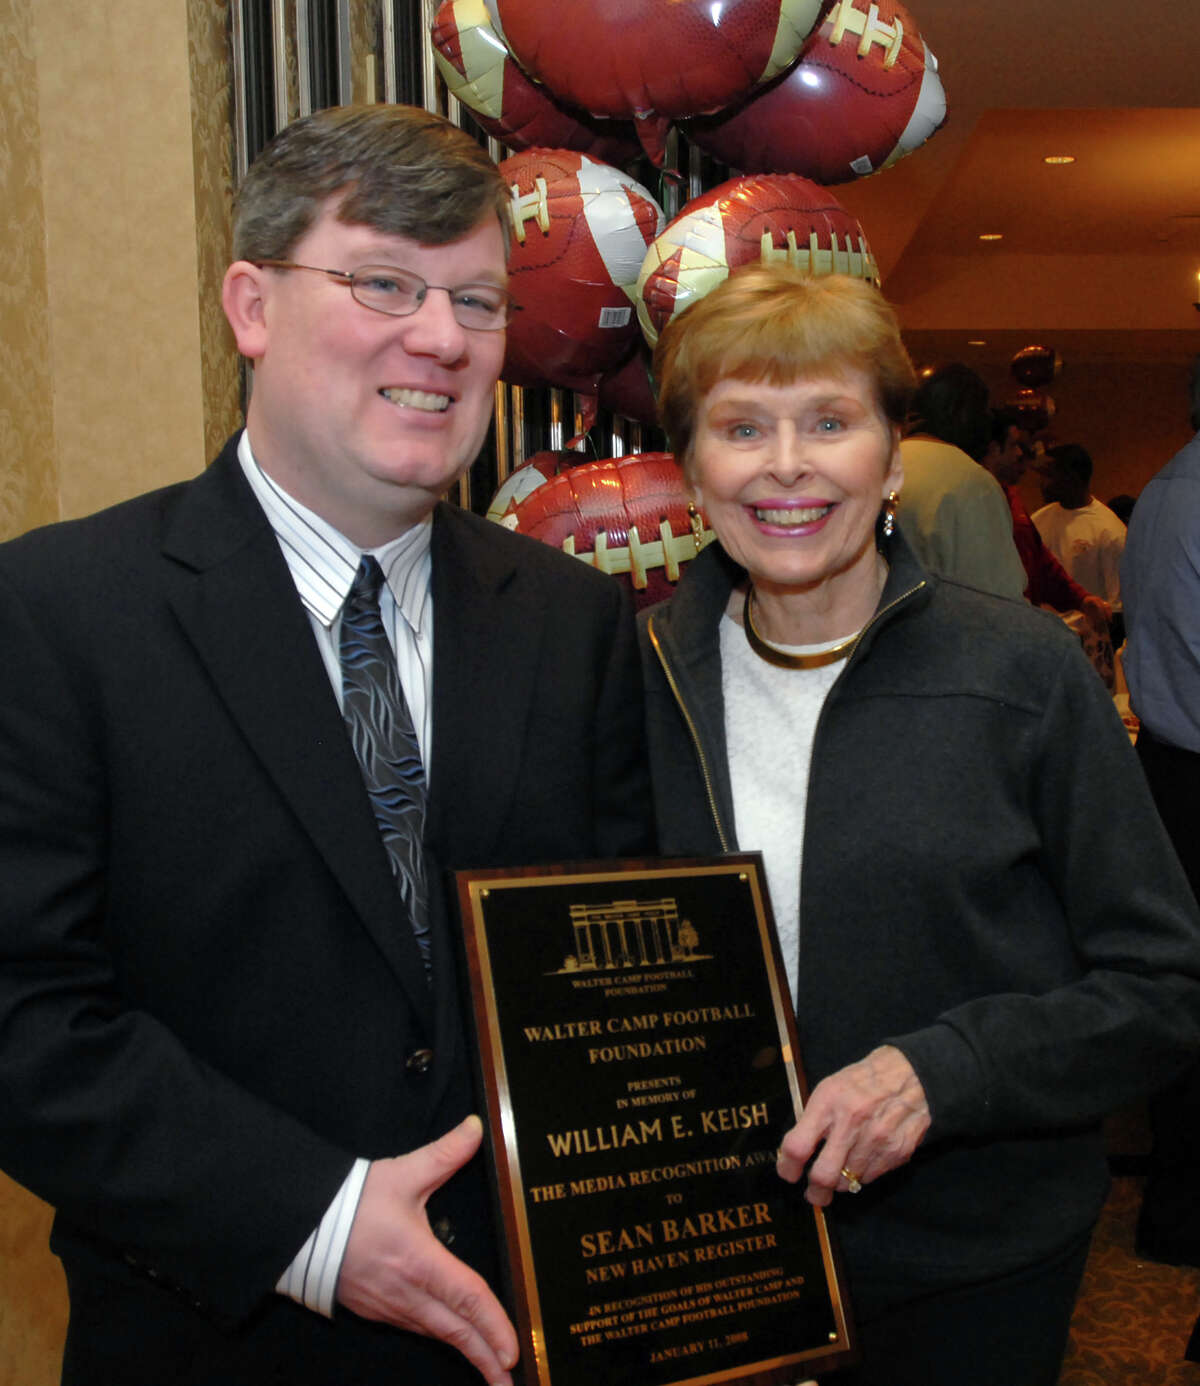 NE1//11/08 3Camp ML0423A Sean Barker of the New Haven Register left and Doris Keish with the William E. Keish Award given to Barker at one of the Walter Camp events at the Omni Hotel in New Haven. Photo by Mara Lavitt